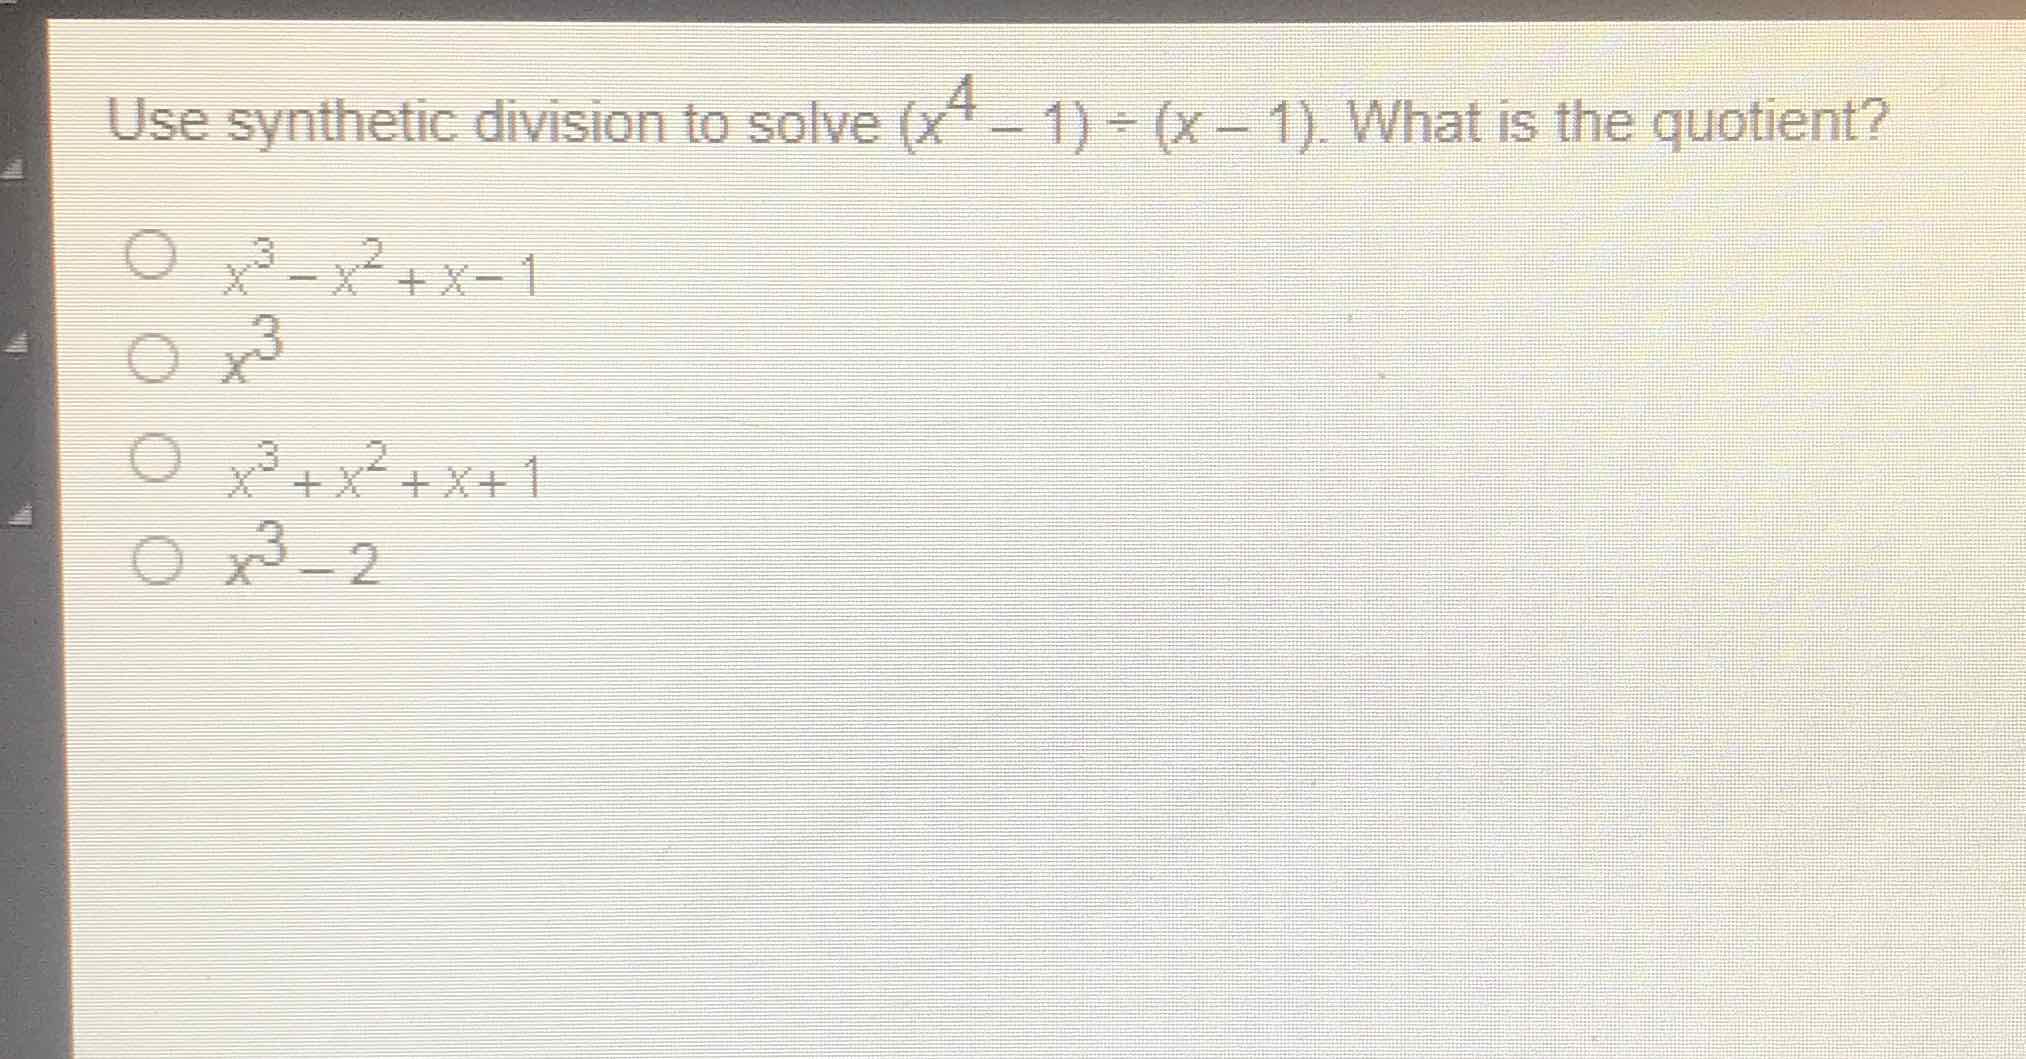 Use synthetic division to solve \( \left(x^{4}-1\right) \div(x-1) \). What is the quotient?
\( x^{3}-x^{2}+x-1 \)
\( x^{3} \)
\( x^{3}+x^{2}+x+1 \)
\( x^{3}-2 \)